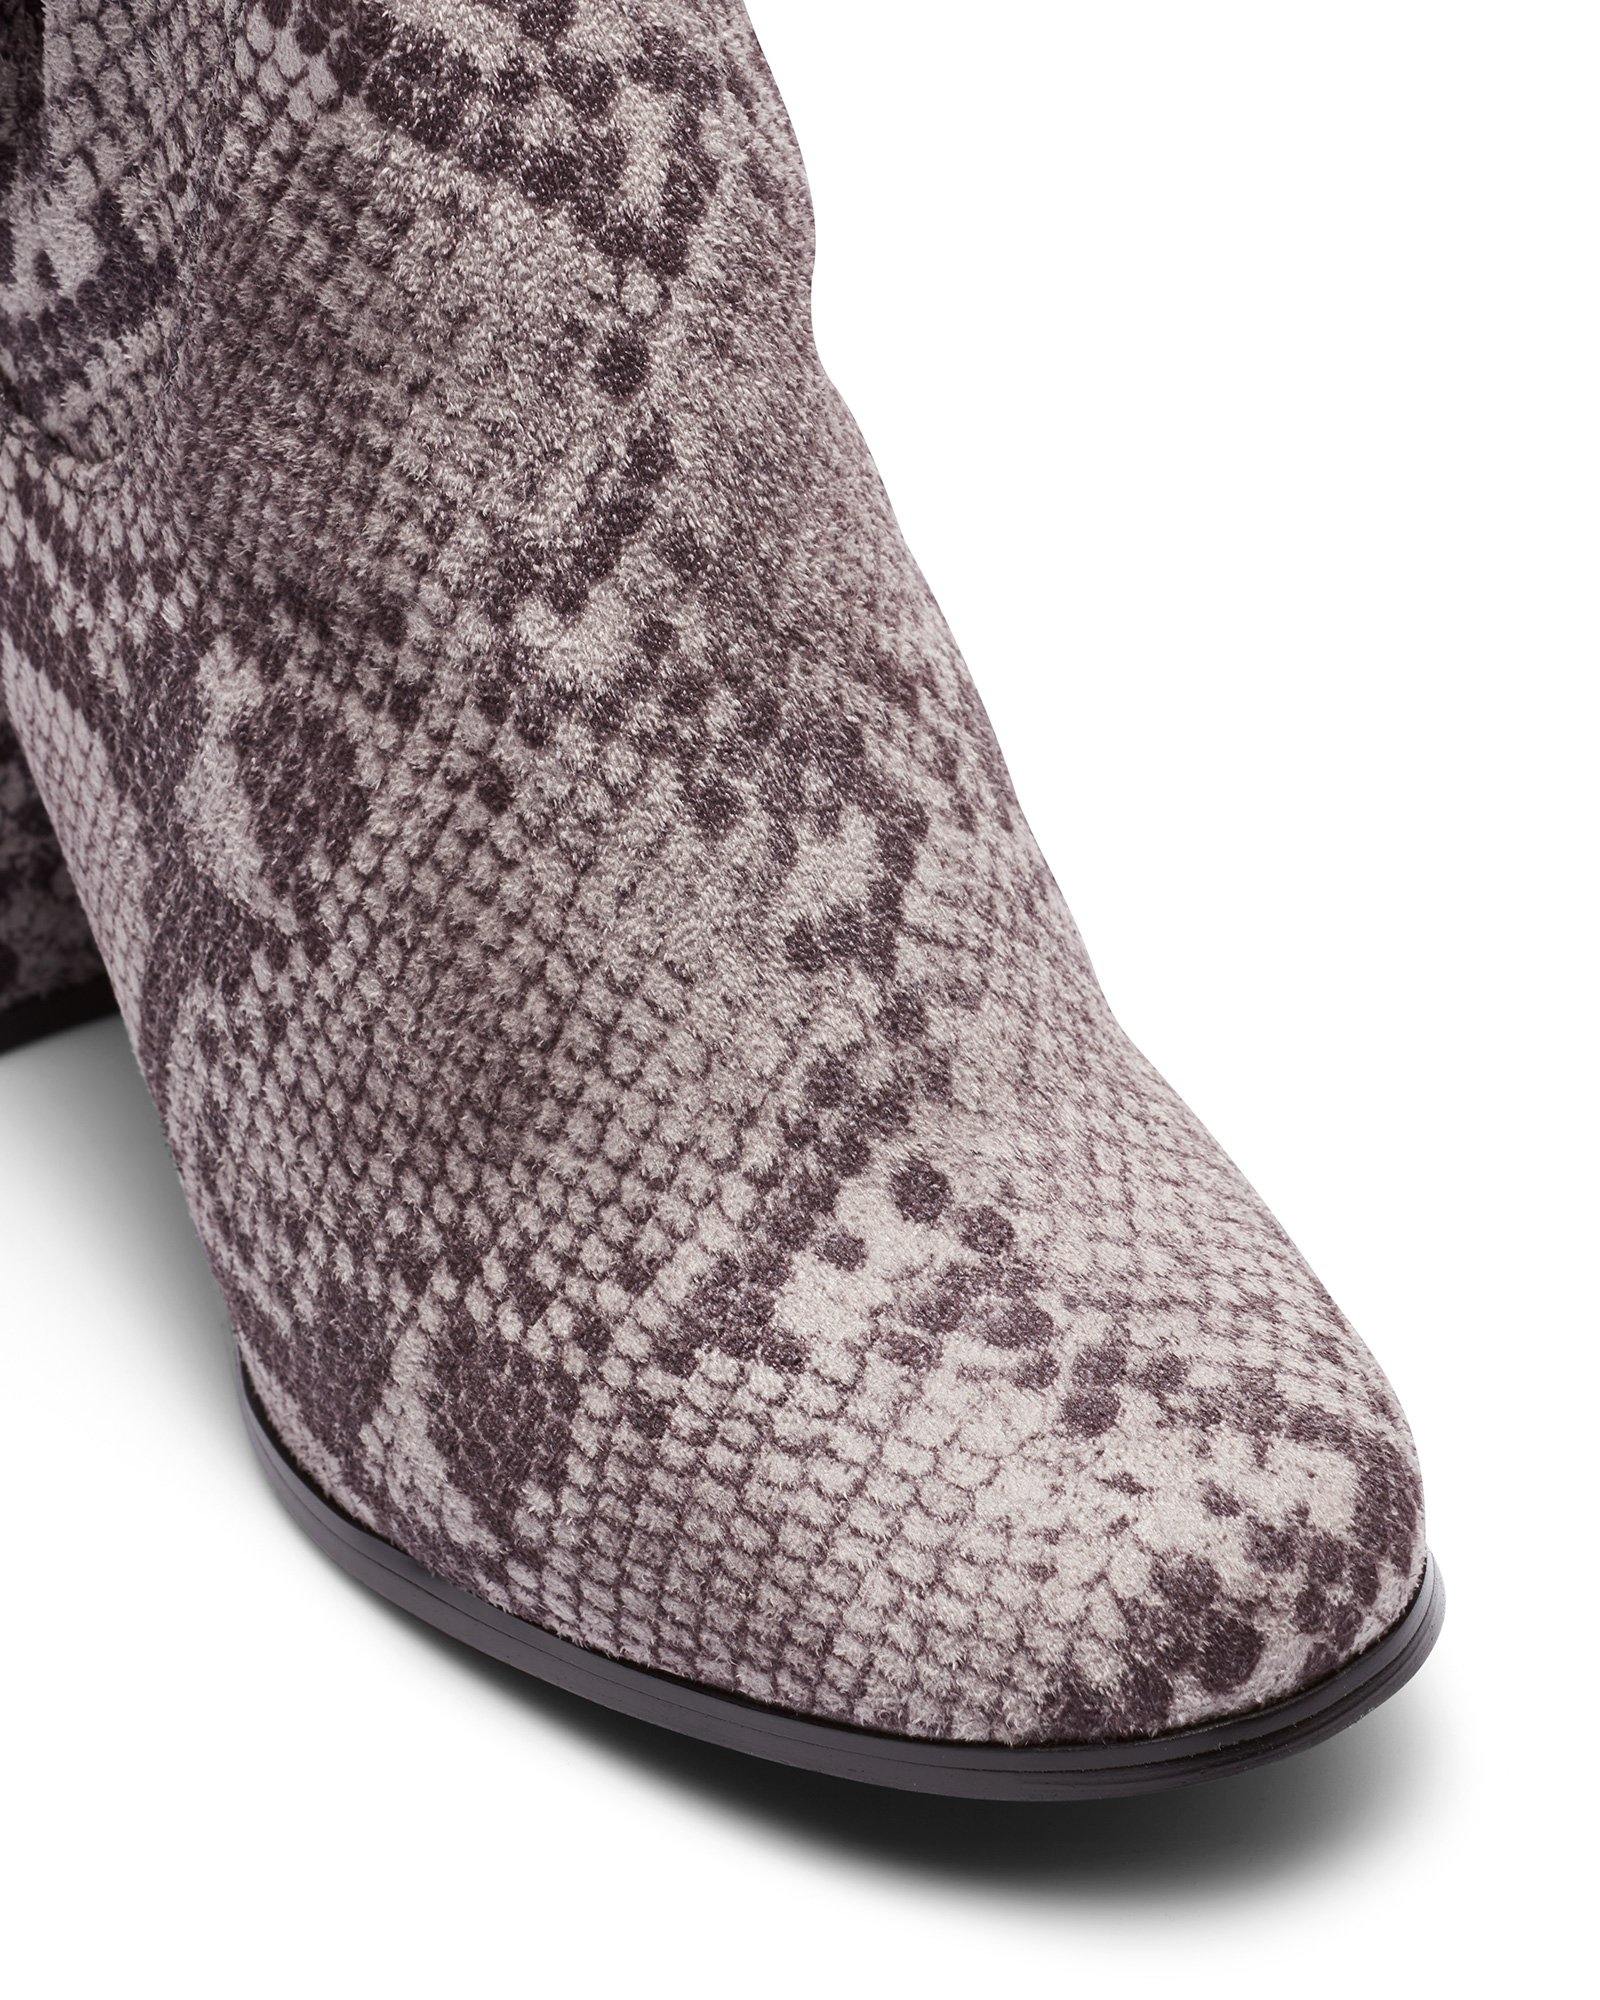 Therapy Shoes Hanover Snake | Women's Boots | Over The Knee 